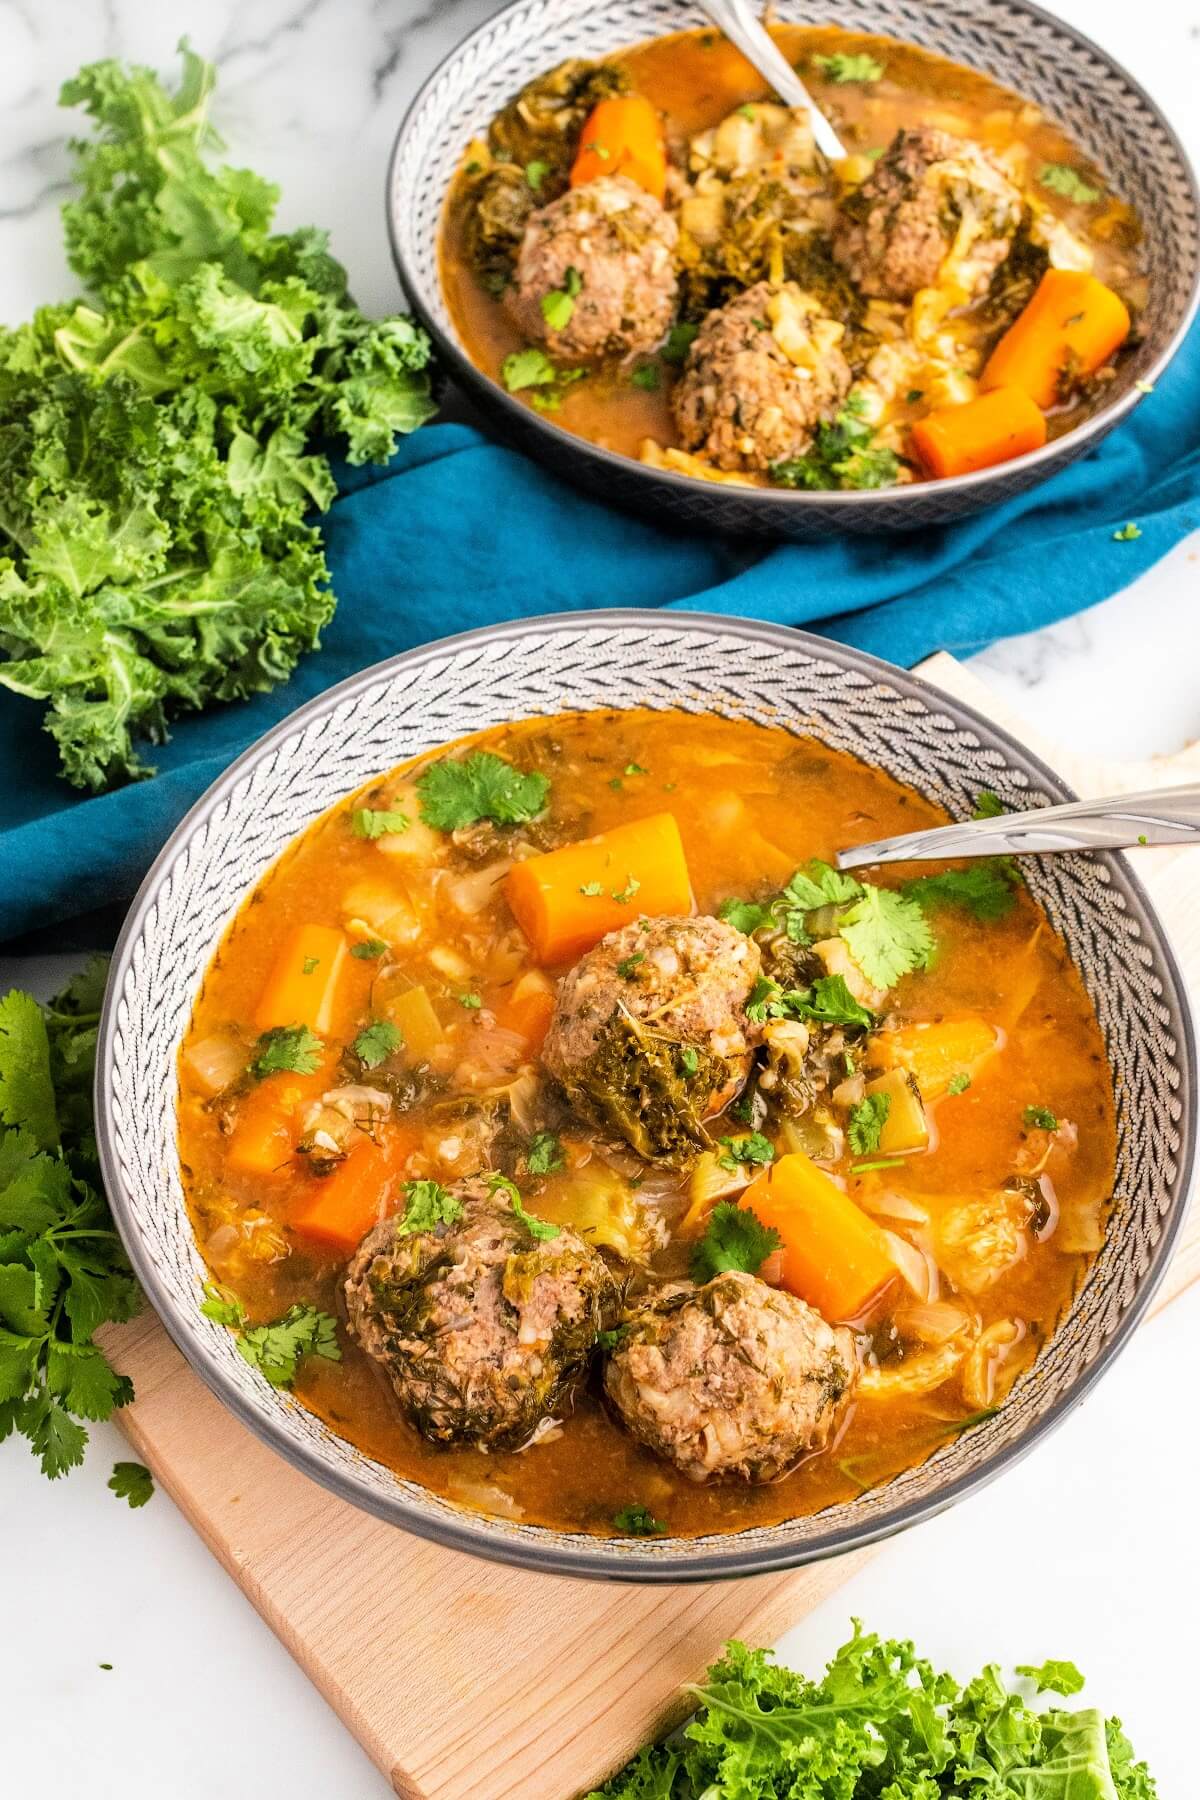 2 bowls of meatball soup with 3 meatballs, chunks of carrots, vegetables and fresh herbs, sitting next to fresh cilantro, fresh kale and a blue cloth napkin.